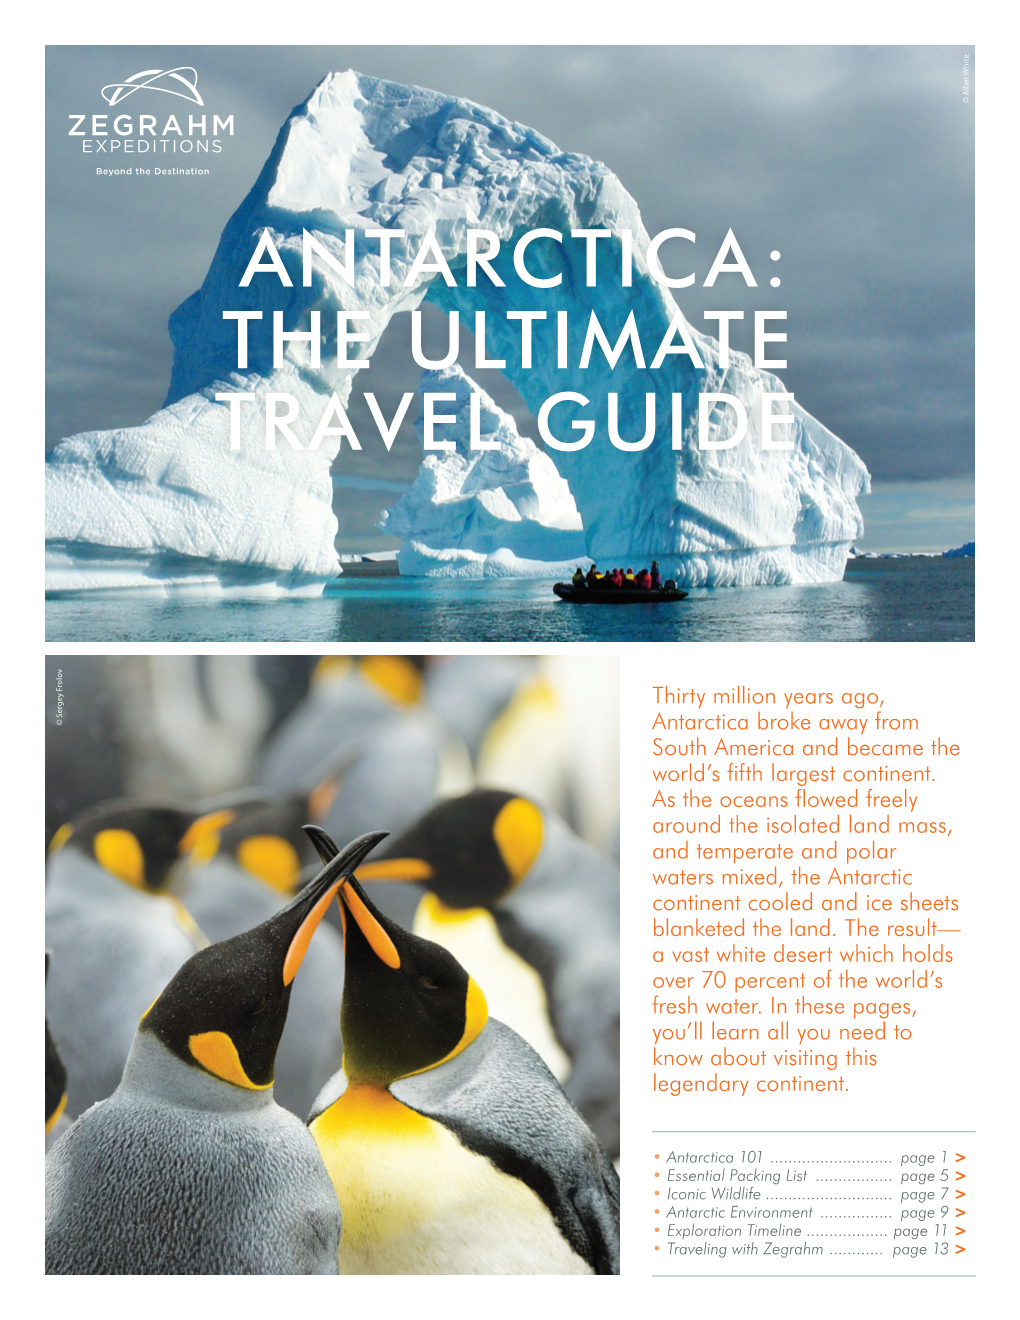 Antarctica: the Ultimate Travel Guide